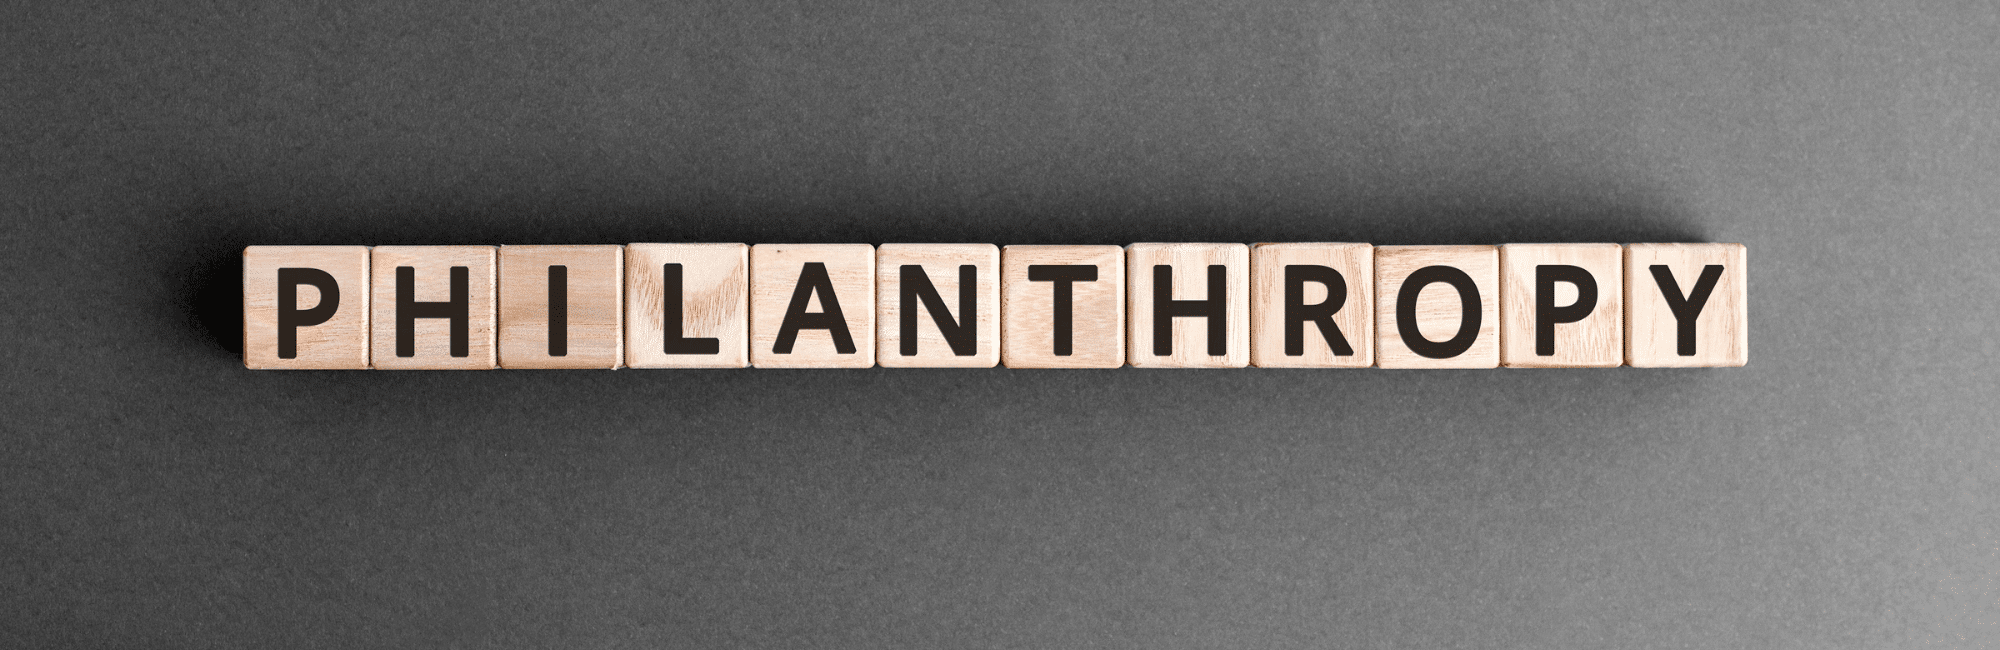 Philanthropists Stepped Up – What Does It Mean for the Future? Banner